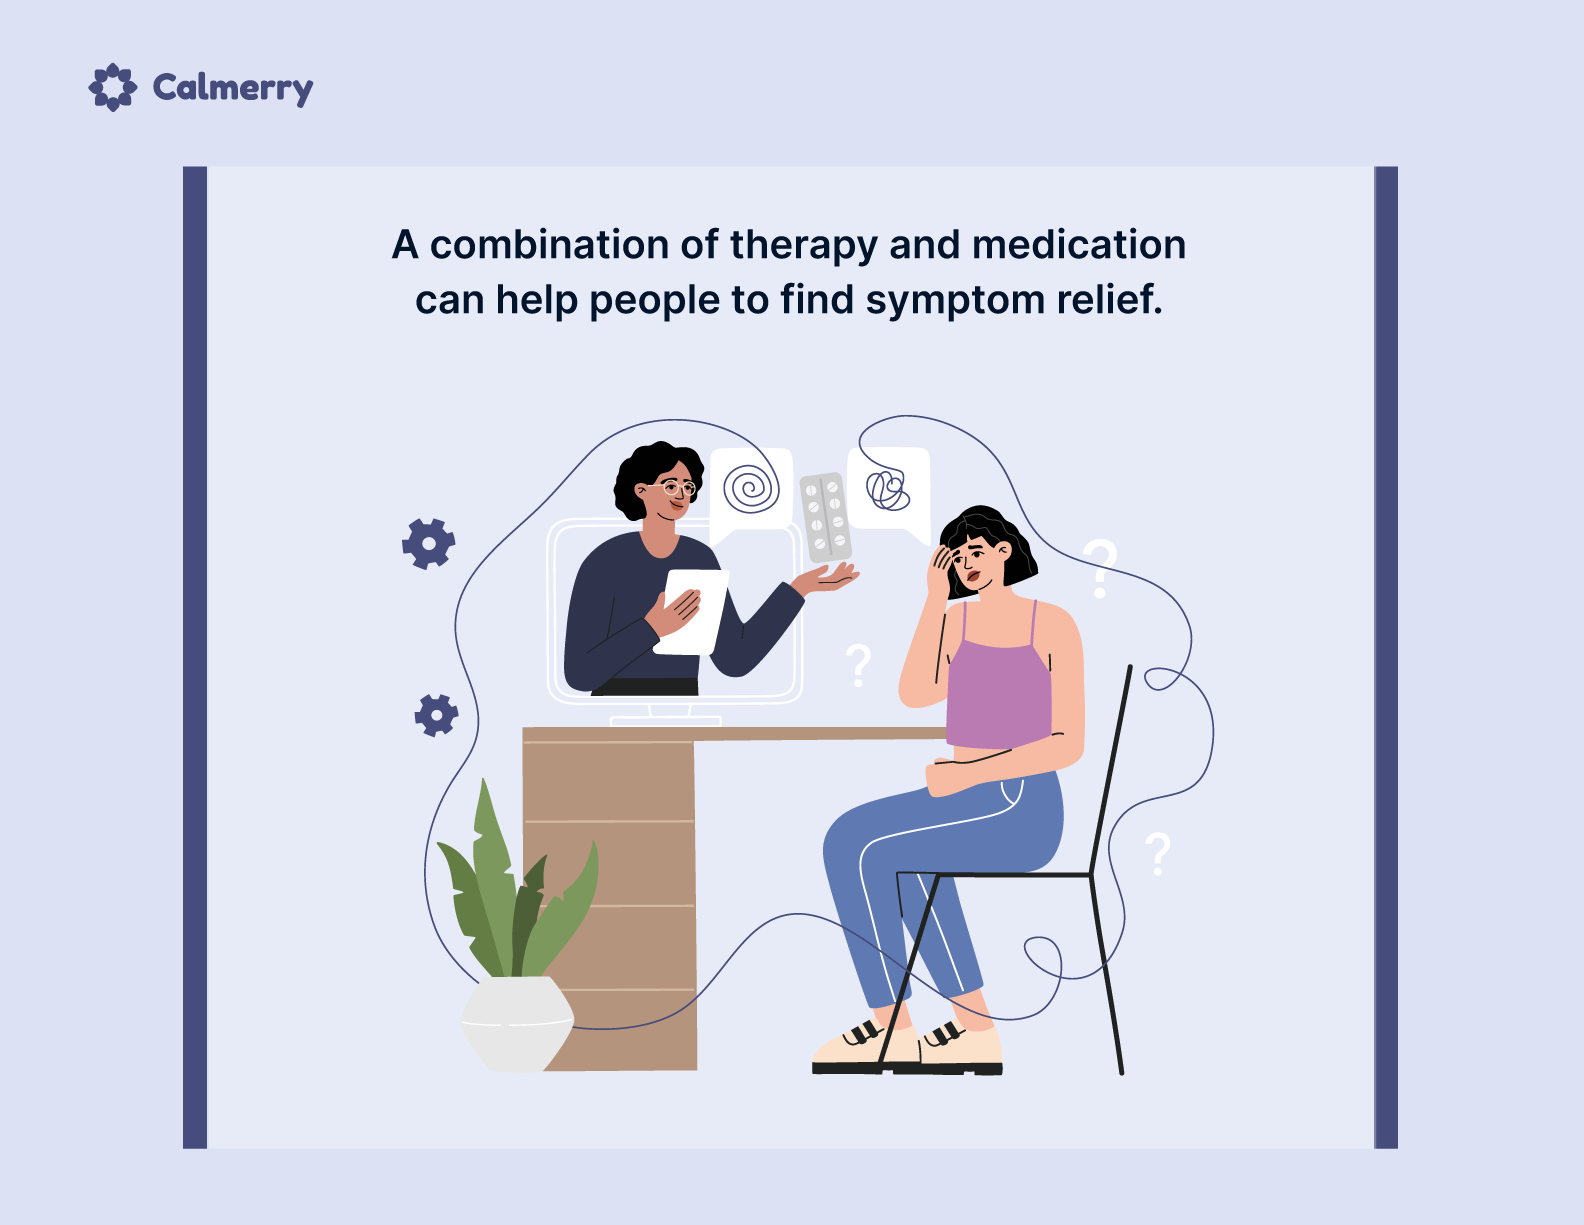 A combination of therapy and medication can help people to find symptom relief